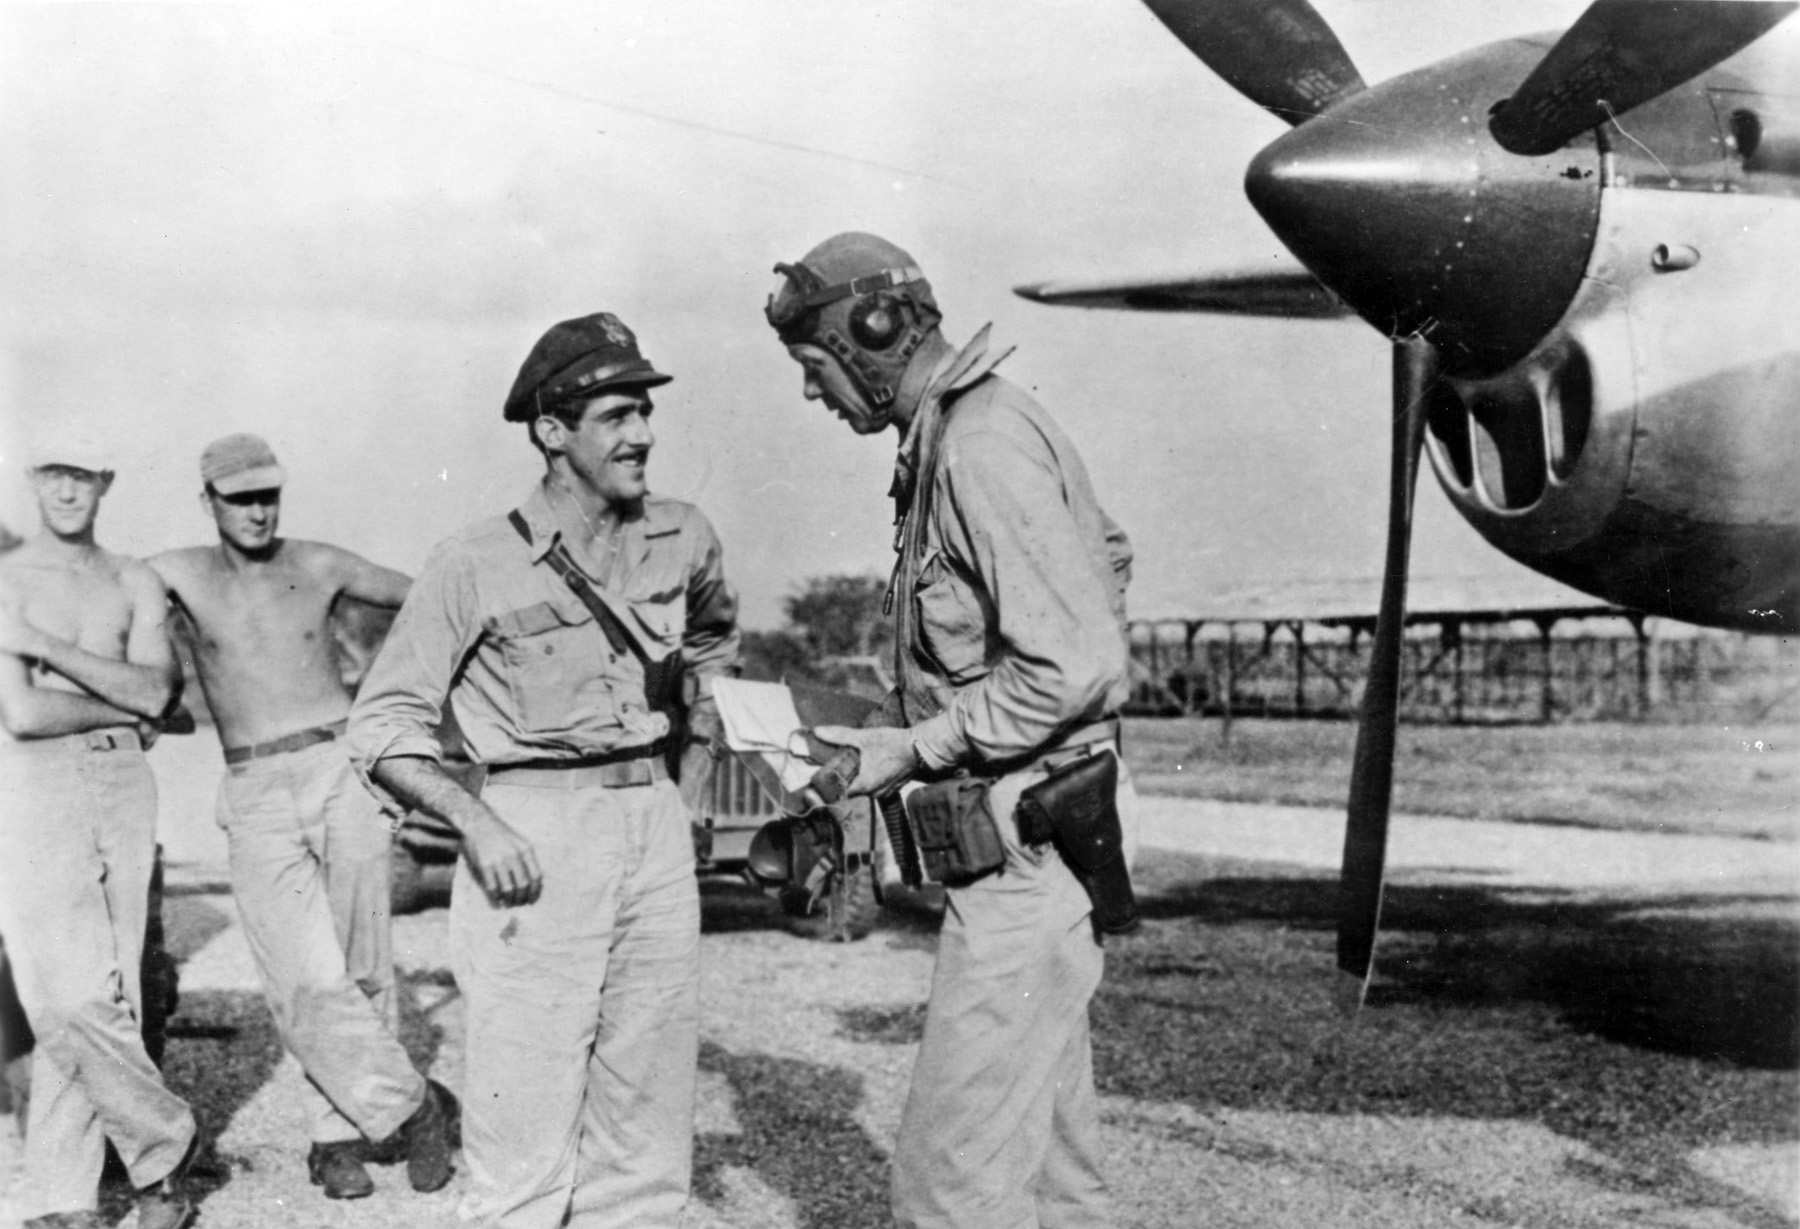 USAAF Maj Thomas McGuire and Aviator Charles Lindbergh after returning from a combat mission, at Biak Island off New Guinea, Jul 1944. Note P-38 Lightning. Lindbergh helped with economical flight techniques to extend the range of P-38s.